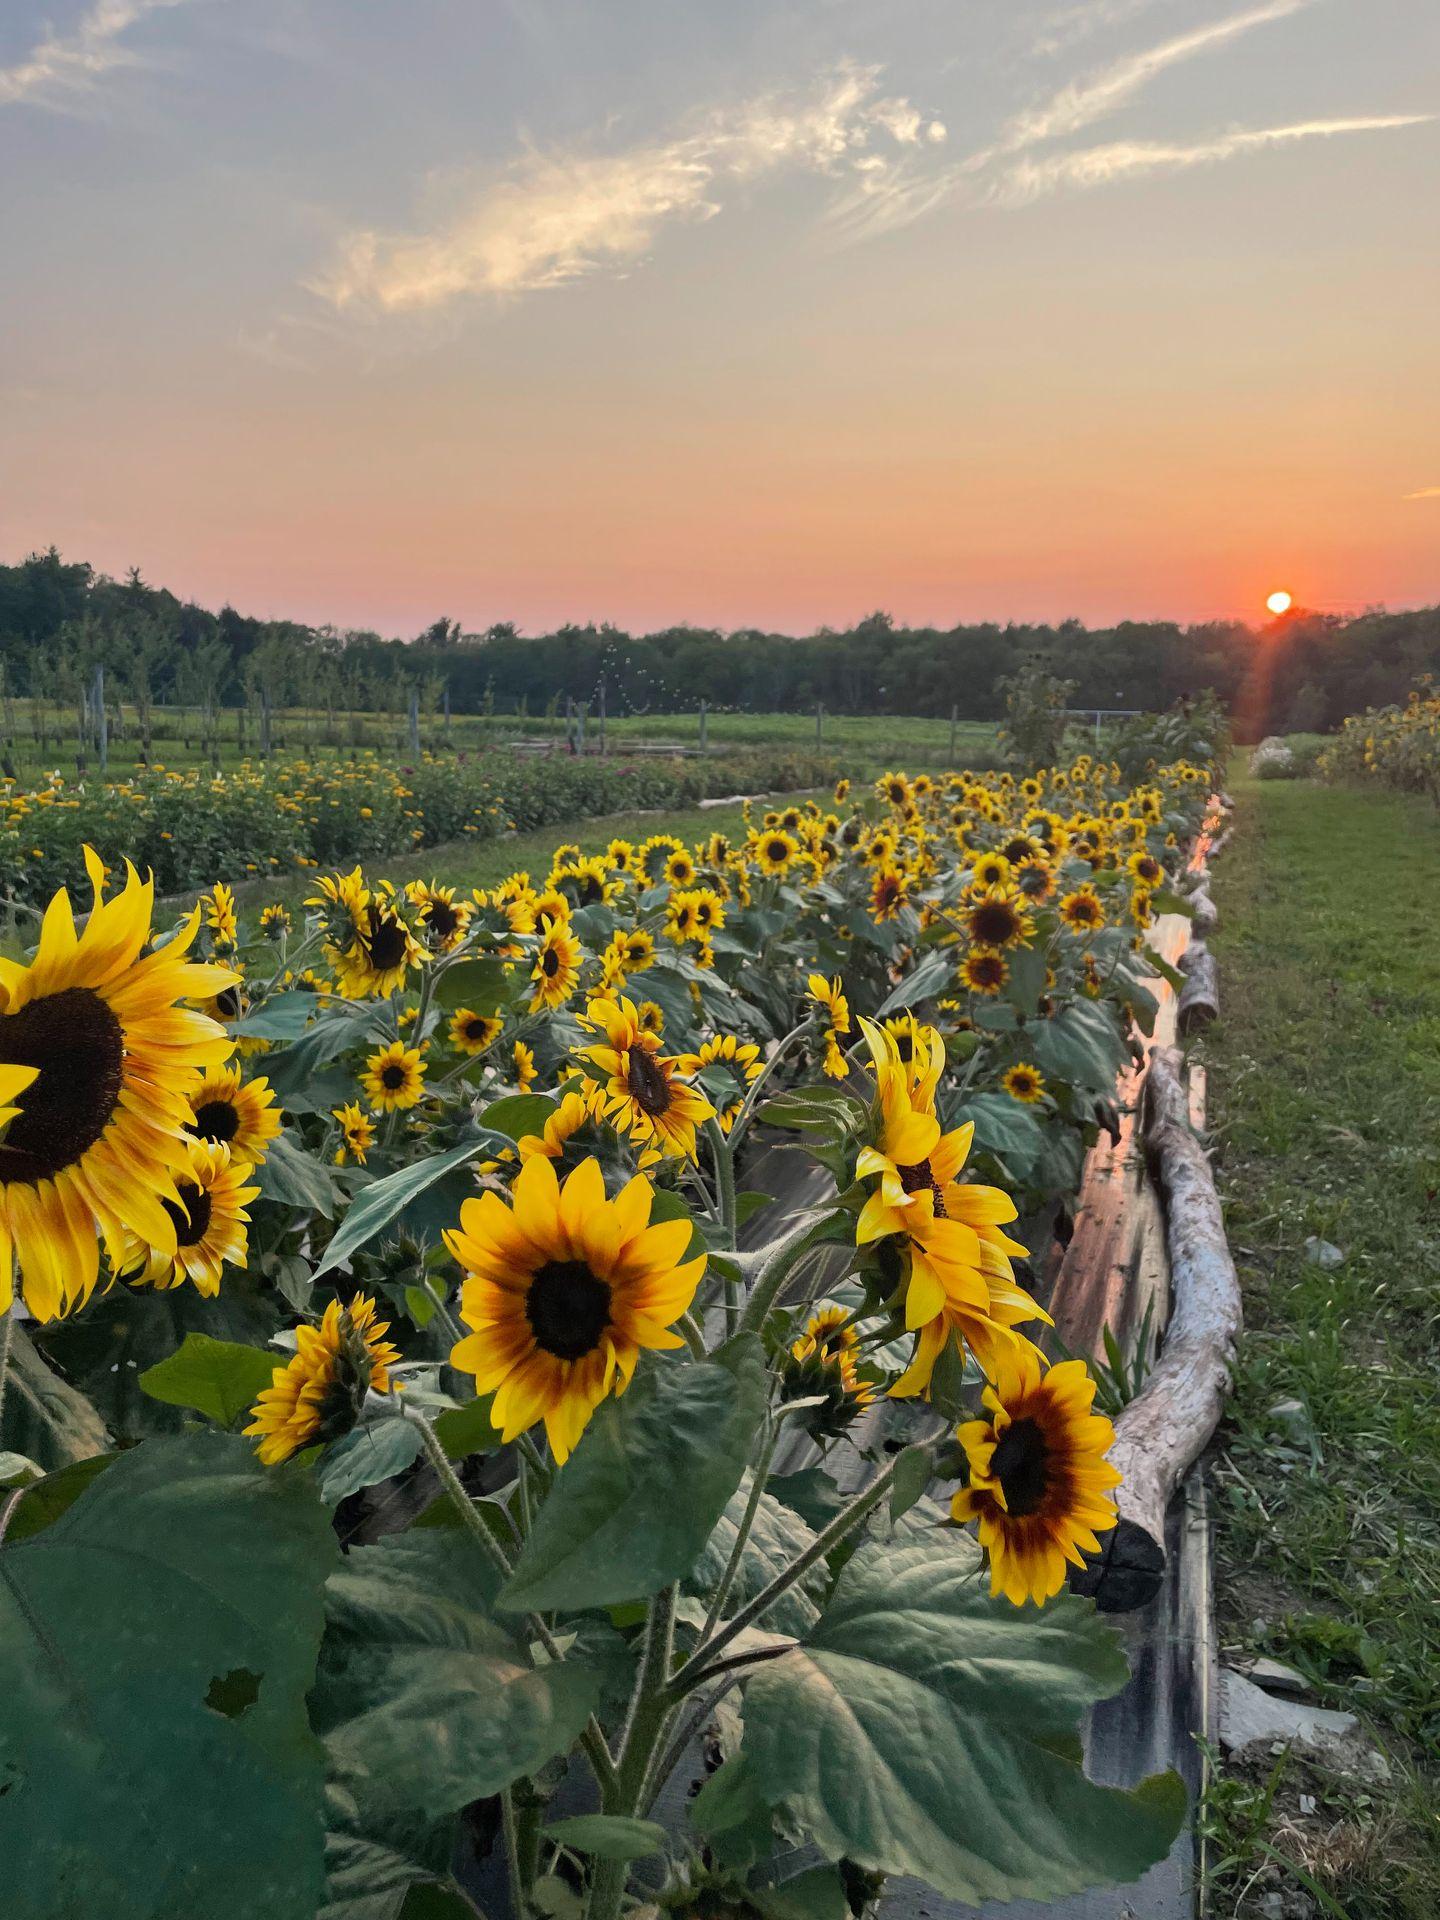 A row of sunflowers with the sun setting in the distance.